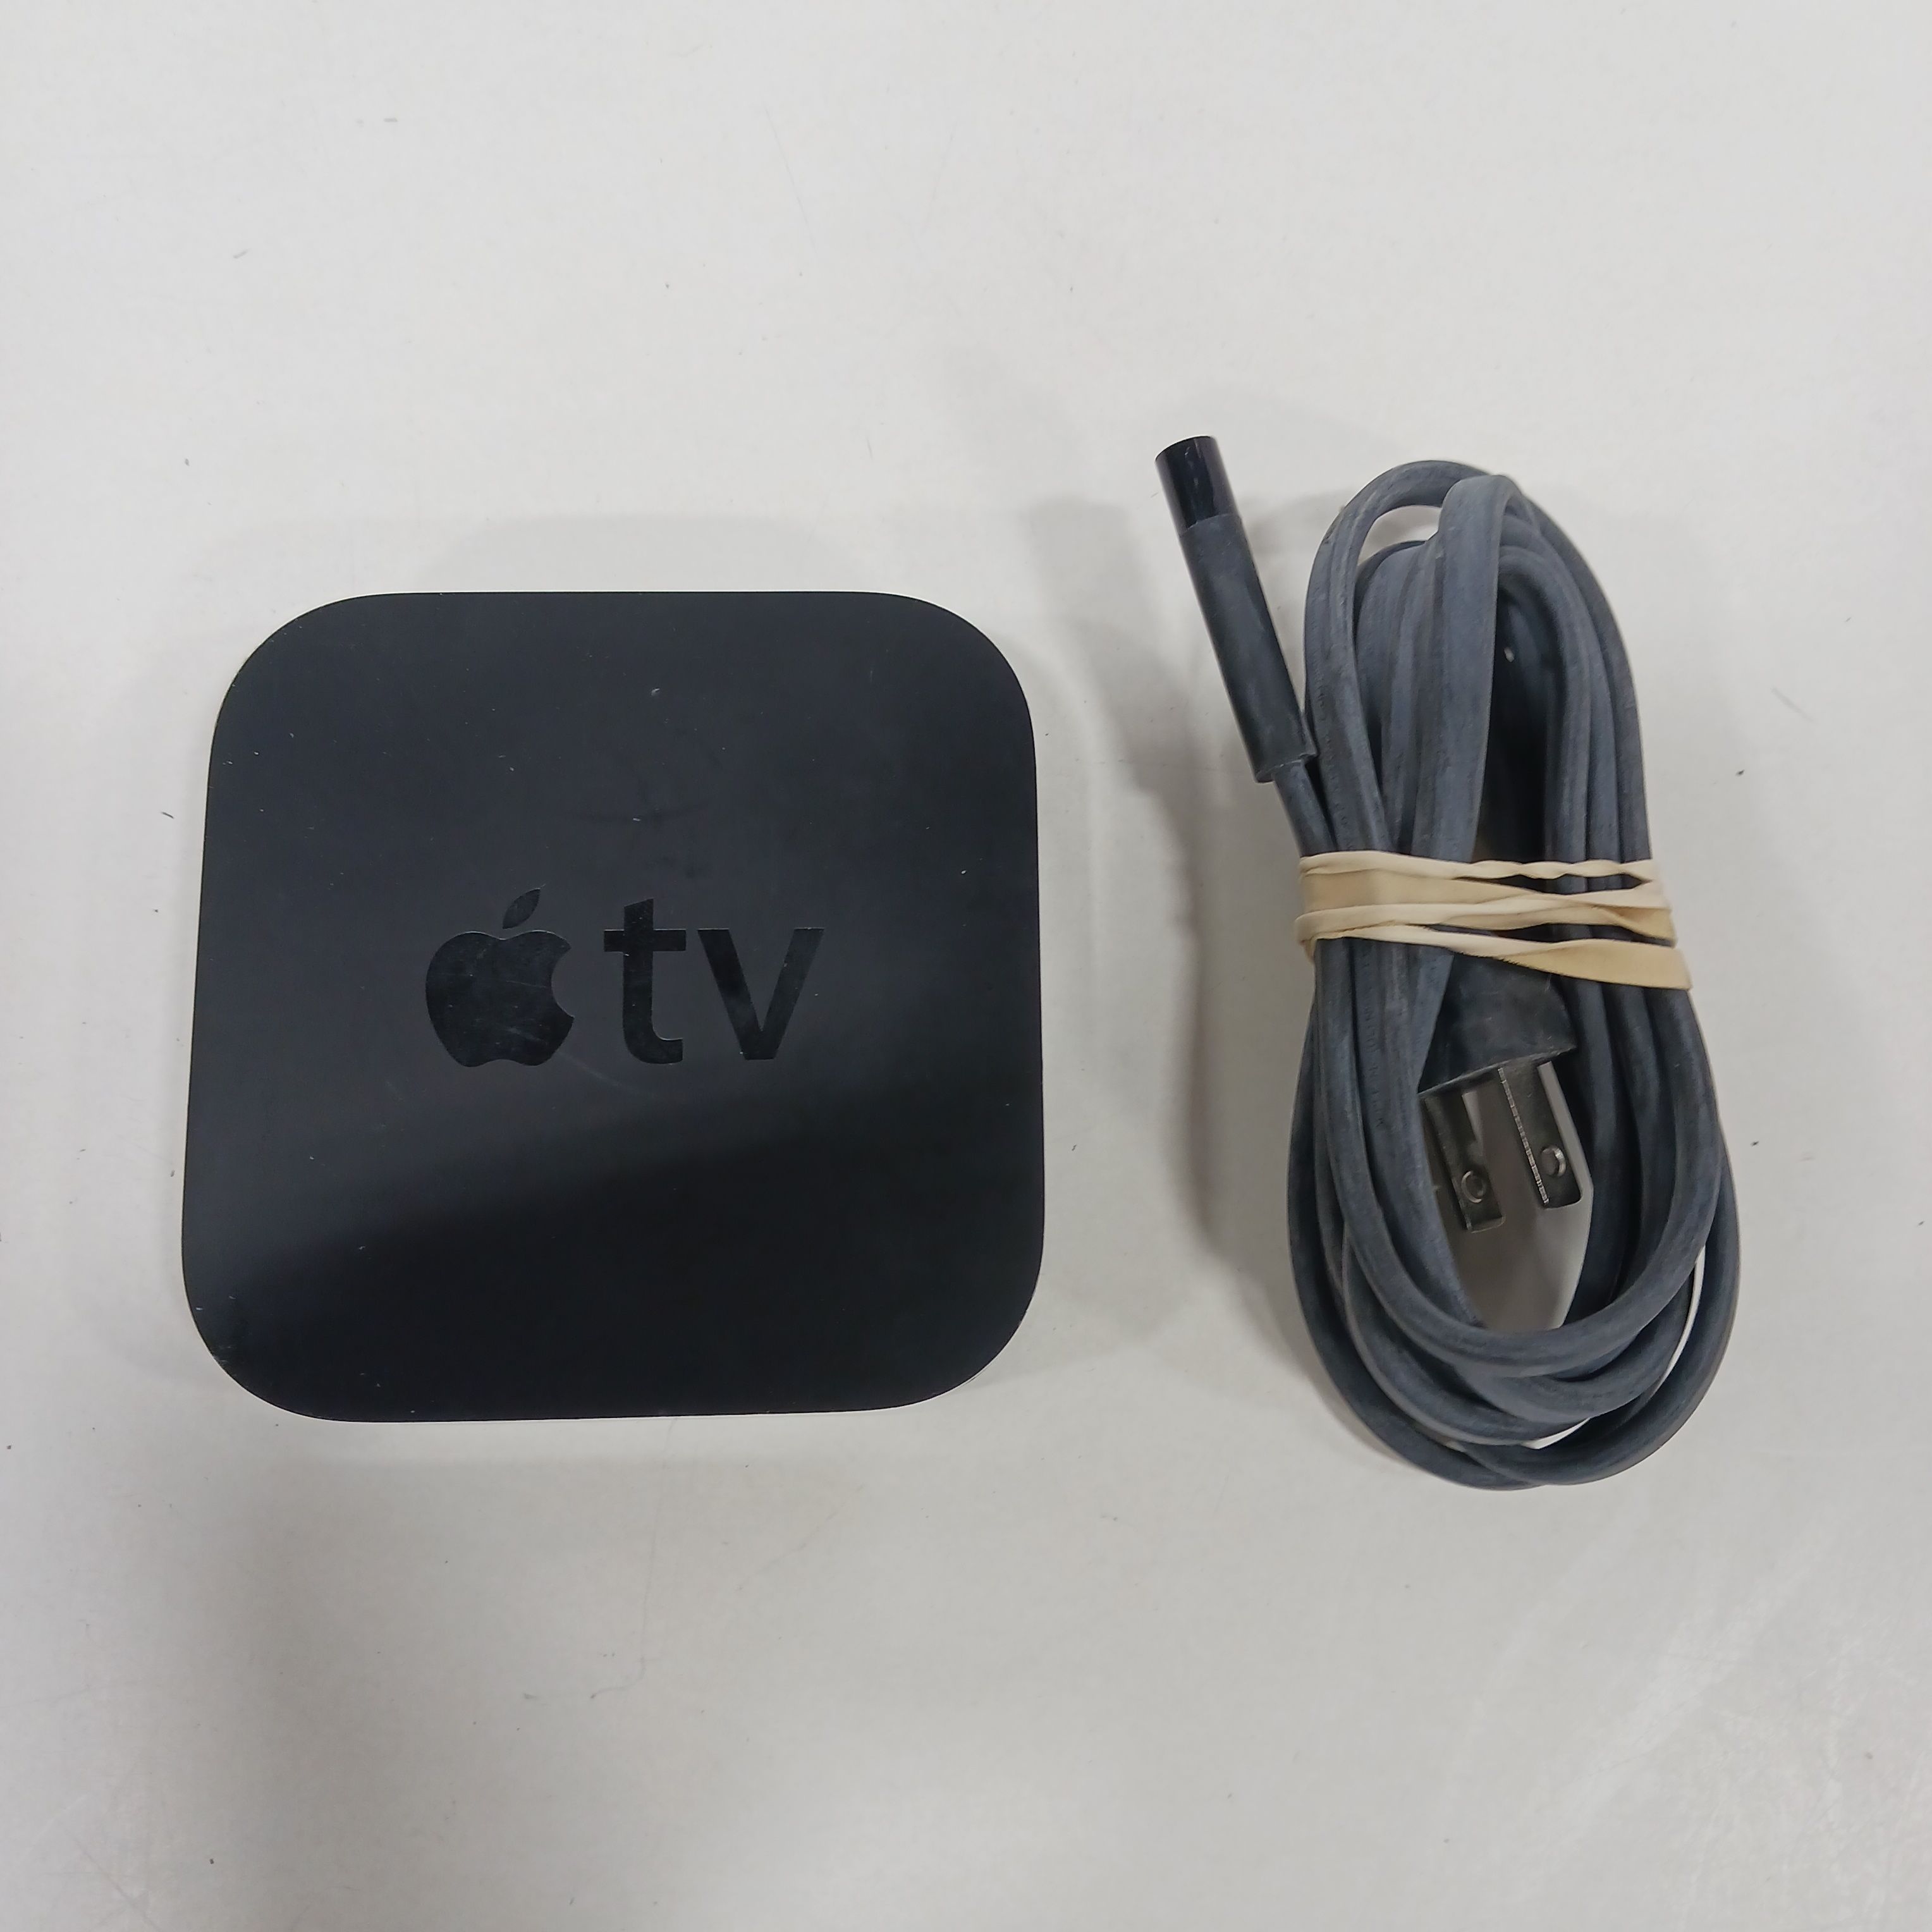 The Wire - Apple TV